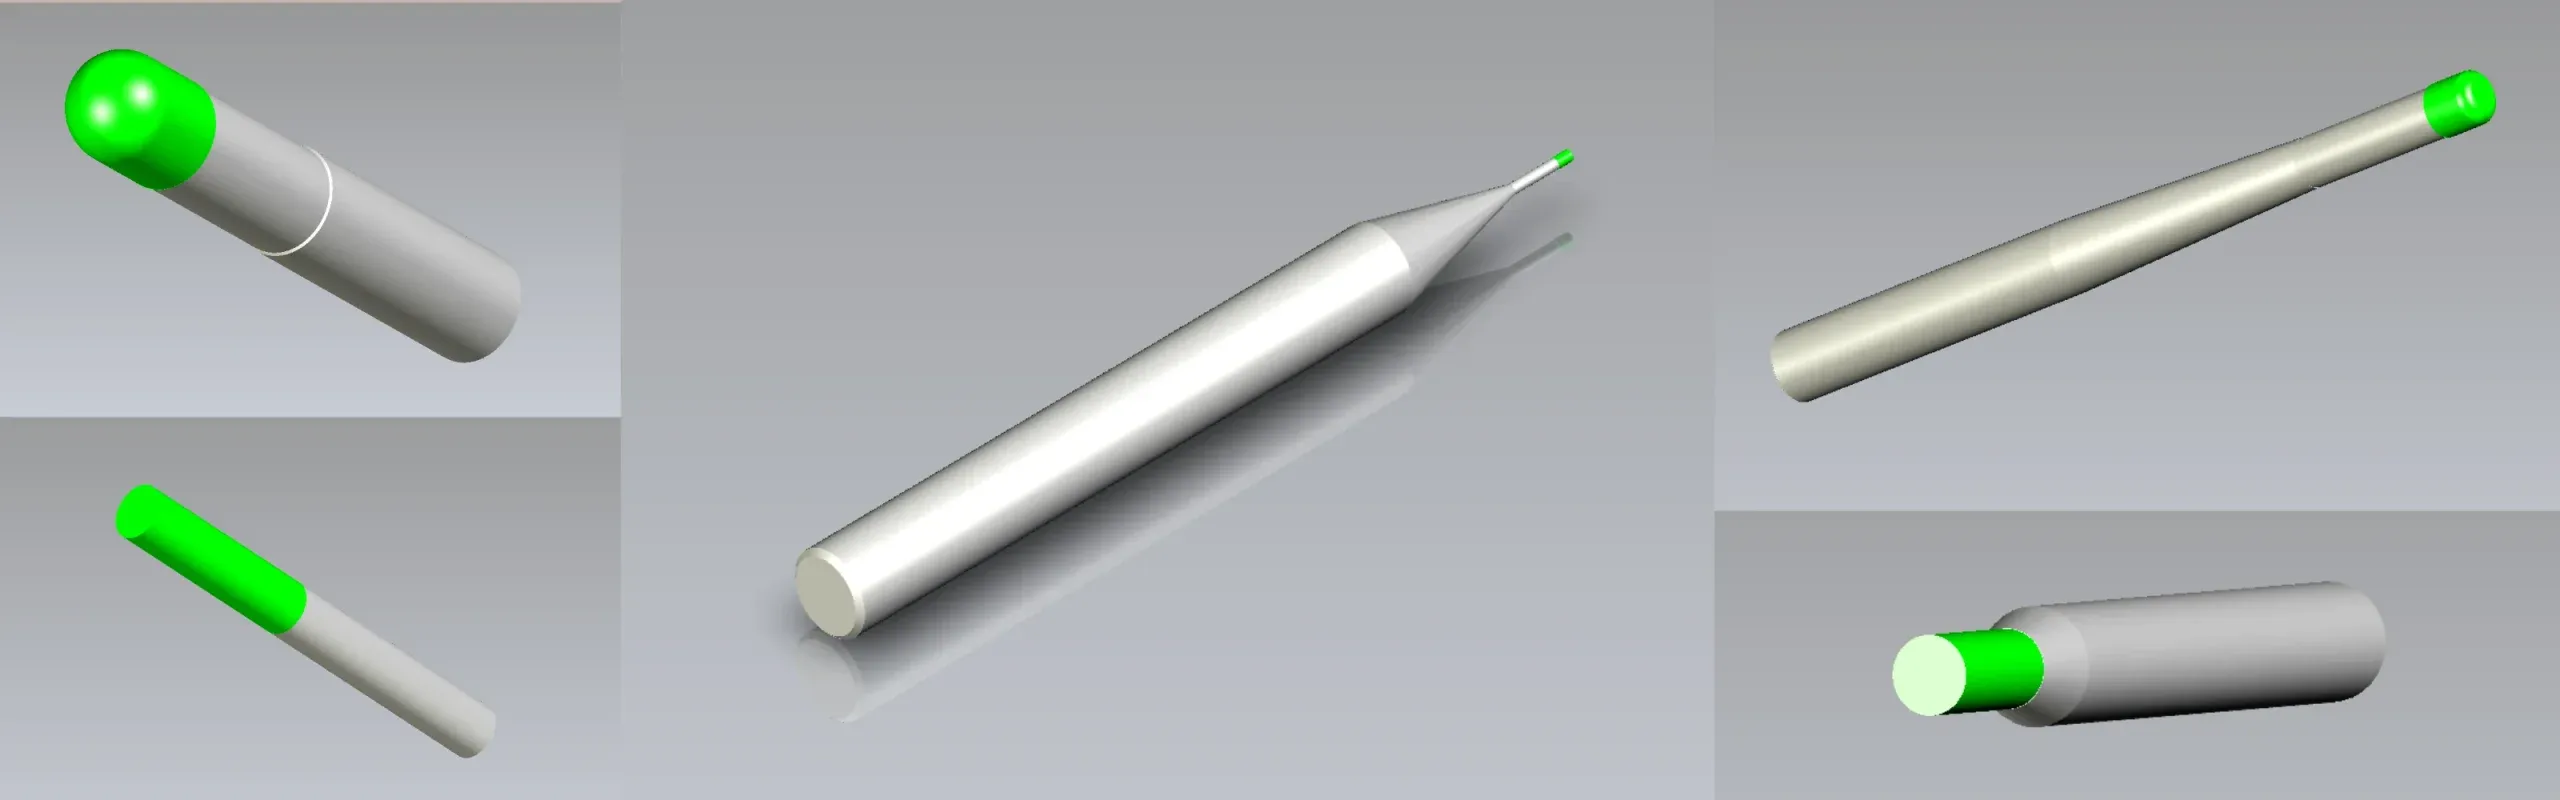 CAD Drawings of Solid Carbide End Mills